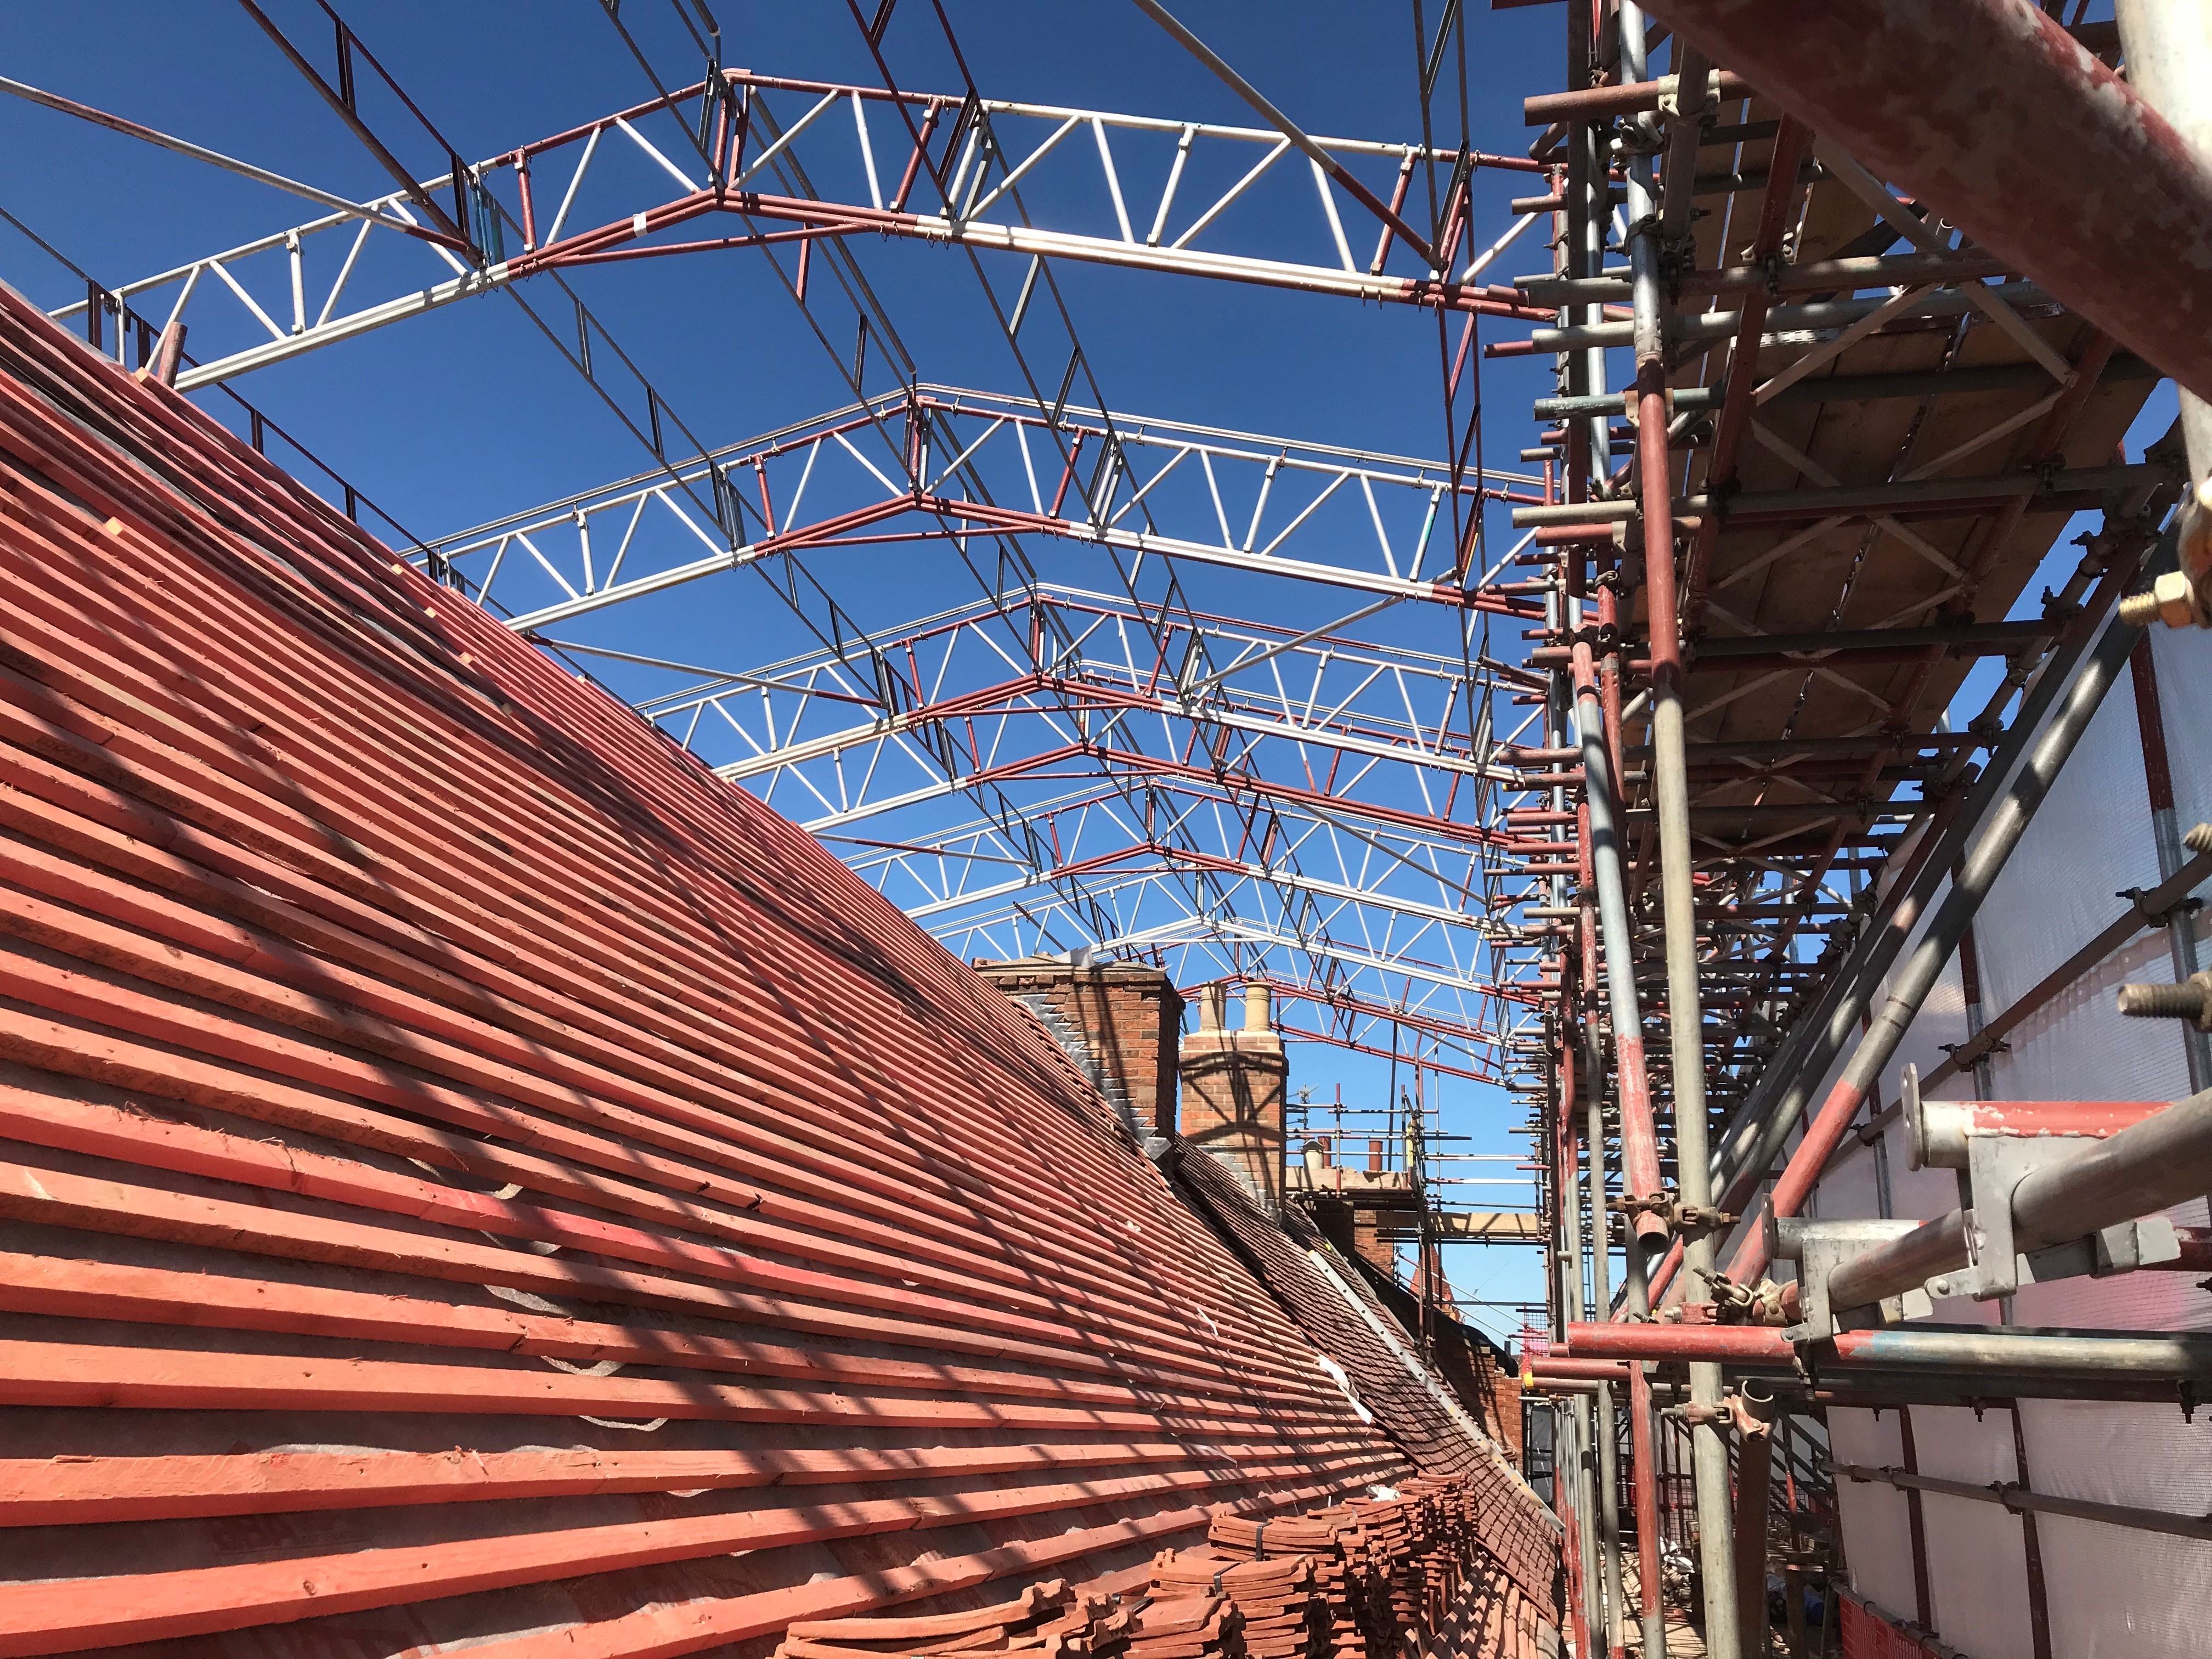 Tamworth Scaffolding: Temporary Roof - Temporary Roofs Commercial Building
